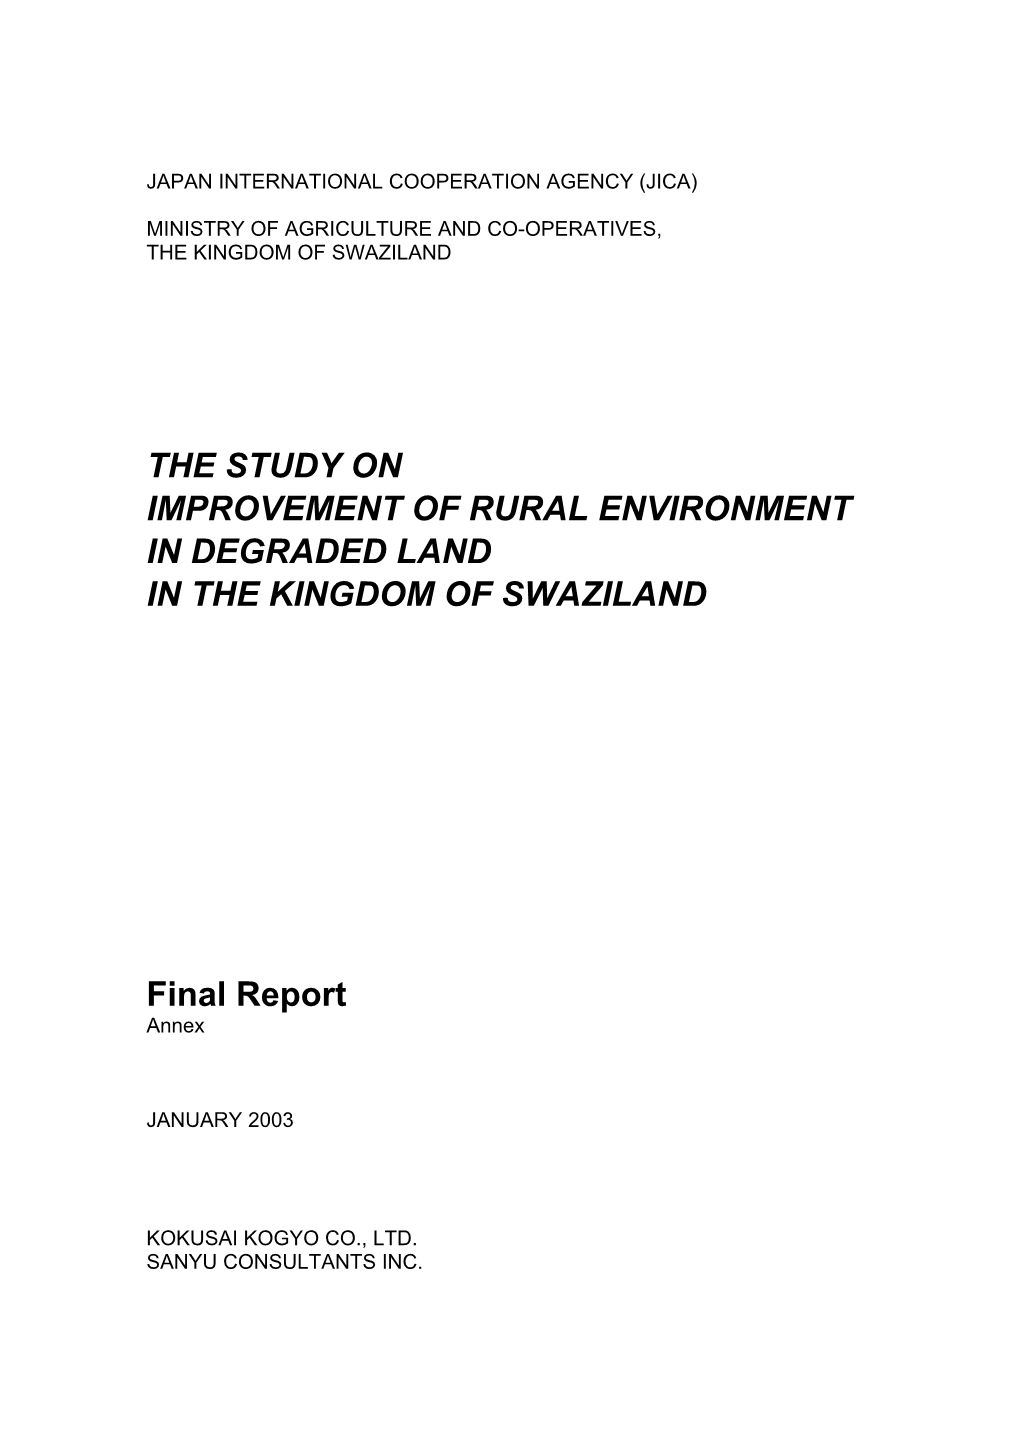 The Study on Improvement of Rural Environment in Degraded Land in the Kingdom of Swaziland